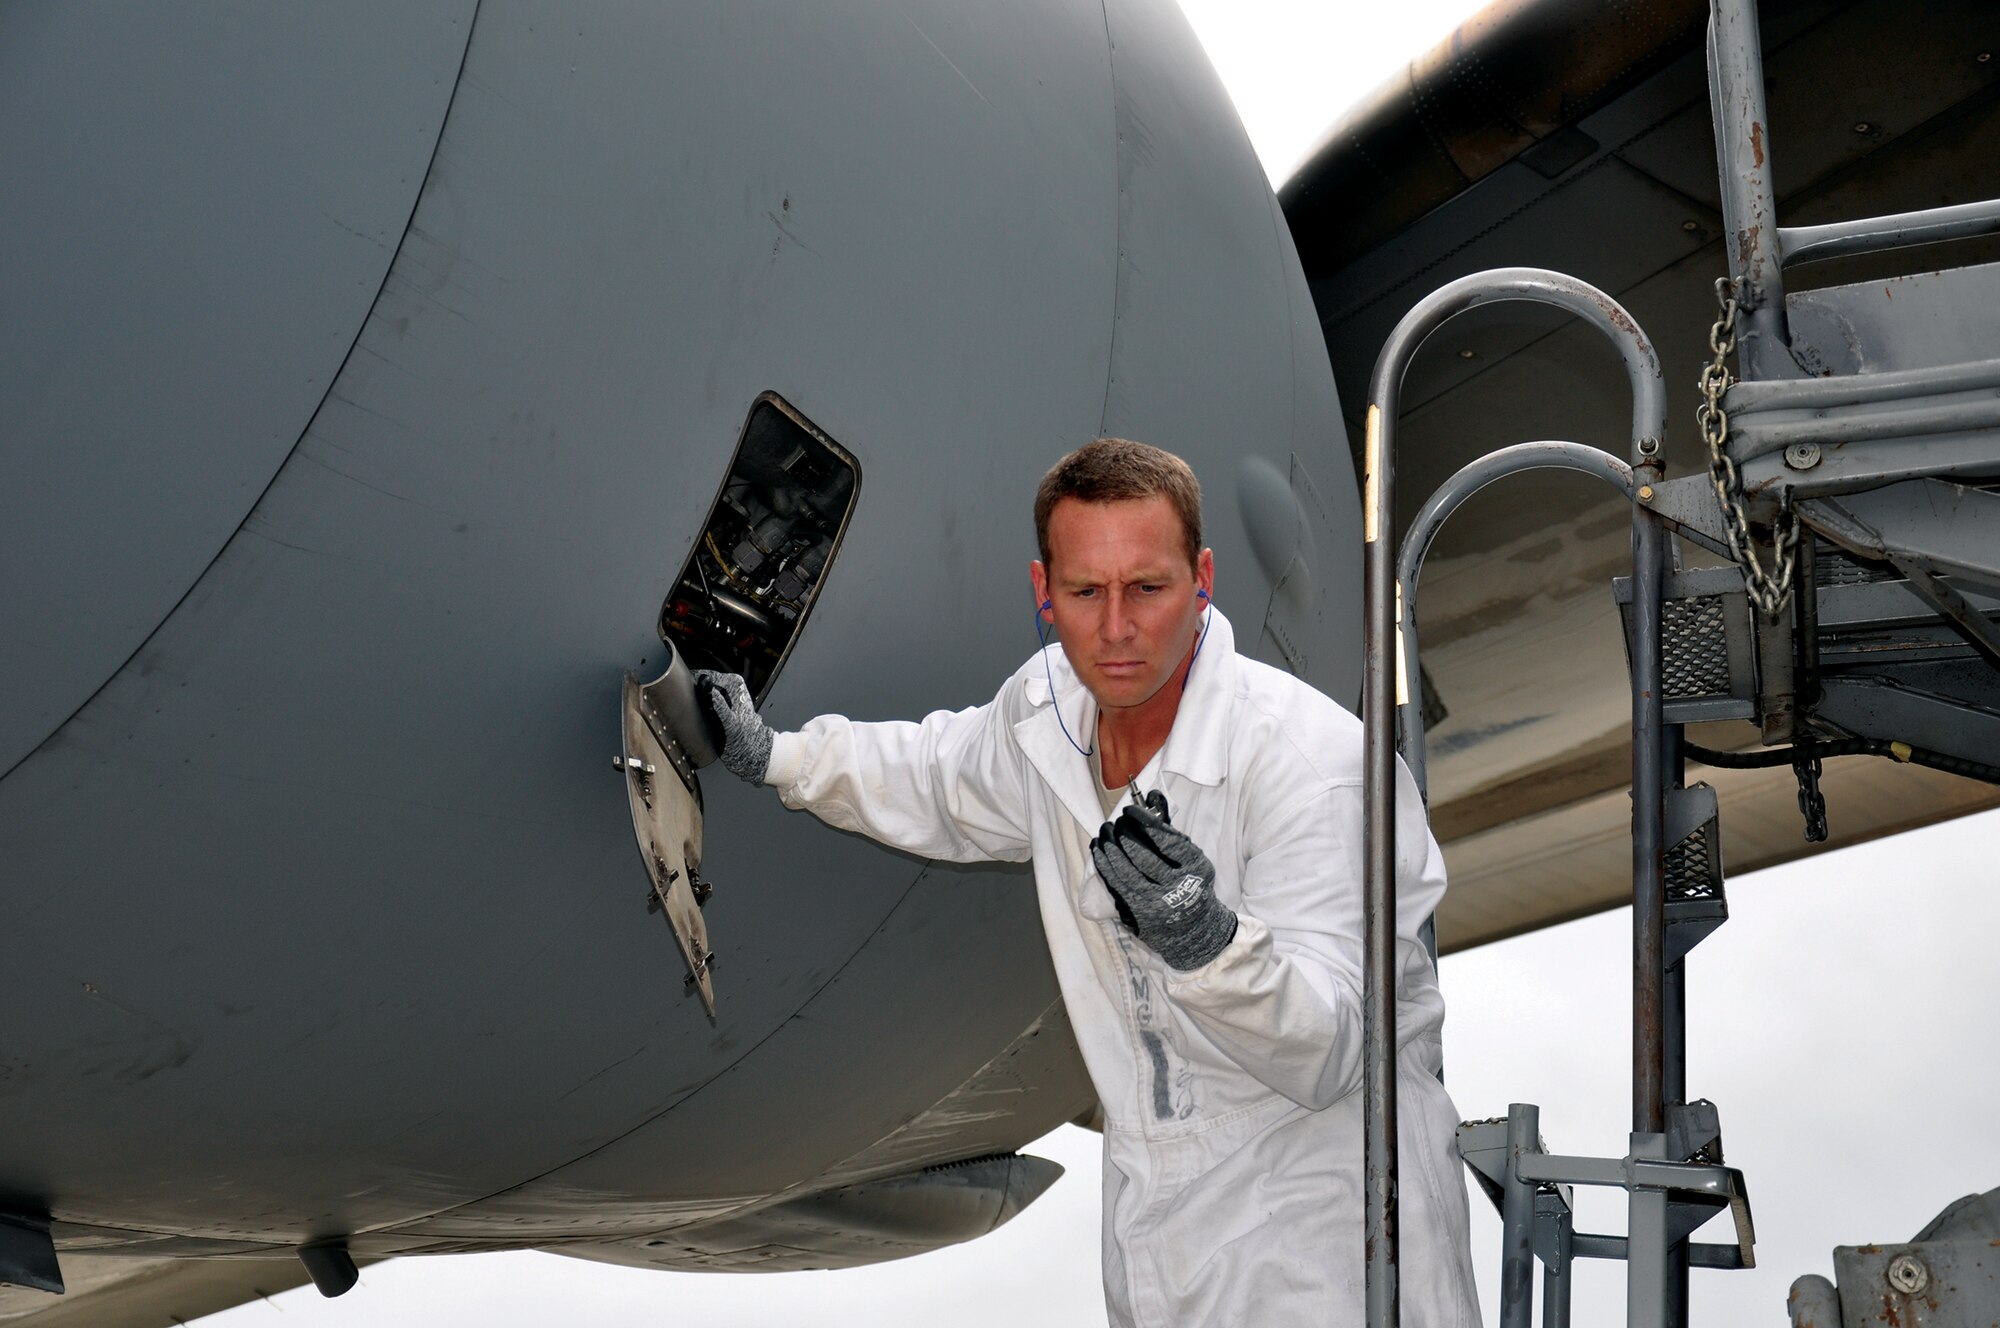 RAMSTEIN AIR BASE, Germany - Staff Sgt. Steve Billingsly, 445th Aircraft Maintenance Squadron C-17 Globemaster III crew chief, checks engine parts as part of a basic post post-op flight July 10, 2014. The 445 AMXS sent 20 maintainers to Germany to serve annual tour time July 7-21. (U.S. Air Force photo/Capt. Elizabeth Caraway)